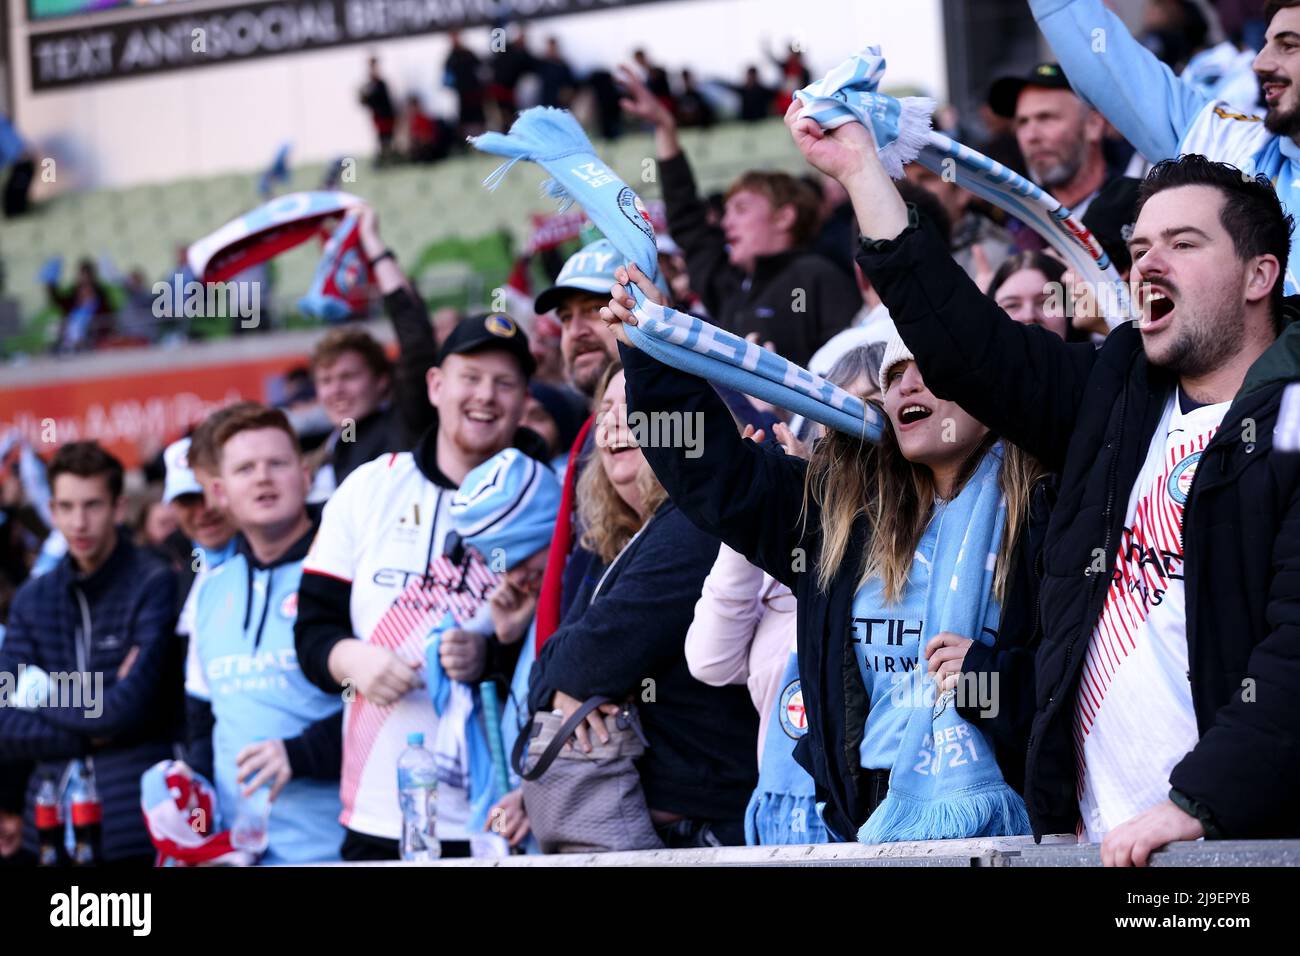 Melbourne, Australia, 22 May, 2022. Melbourne City fans cheer as they score a goal during the A-League Semi Final soccer match between Melbourne City FC and Adelaide United at AAMI Park on May 22, 2022 in Melbourne, Australia. Credit: Dave Hewison/Speed Media/Alamy Live News Stock Photo